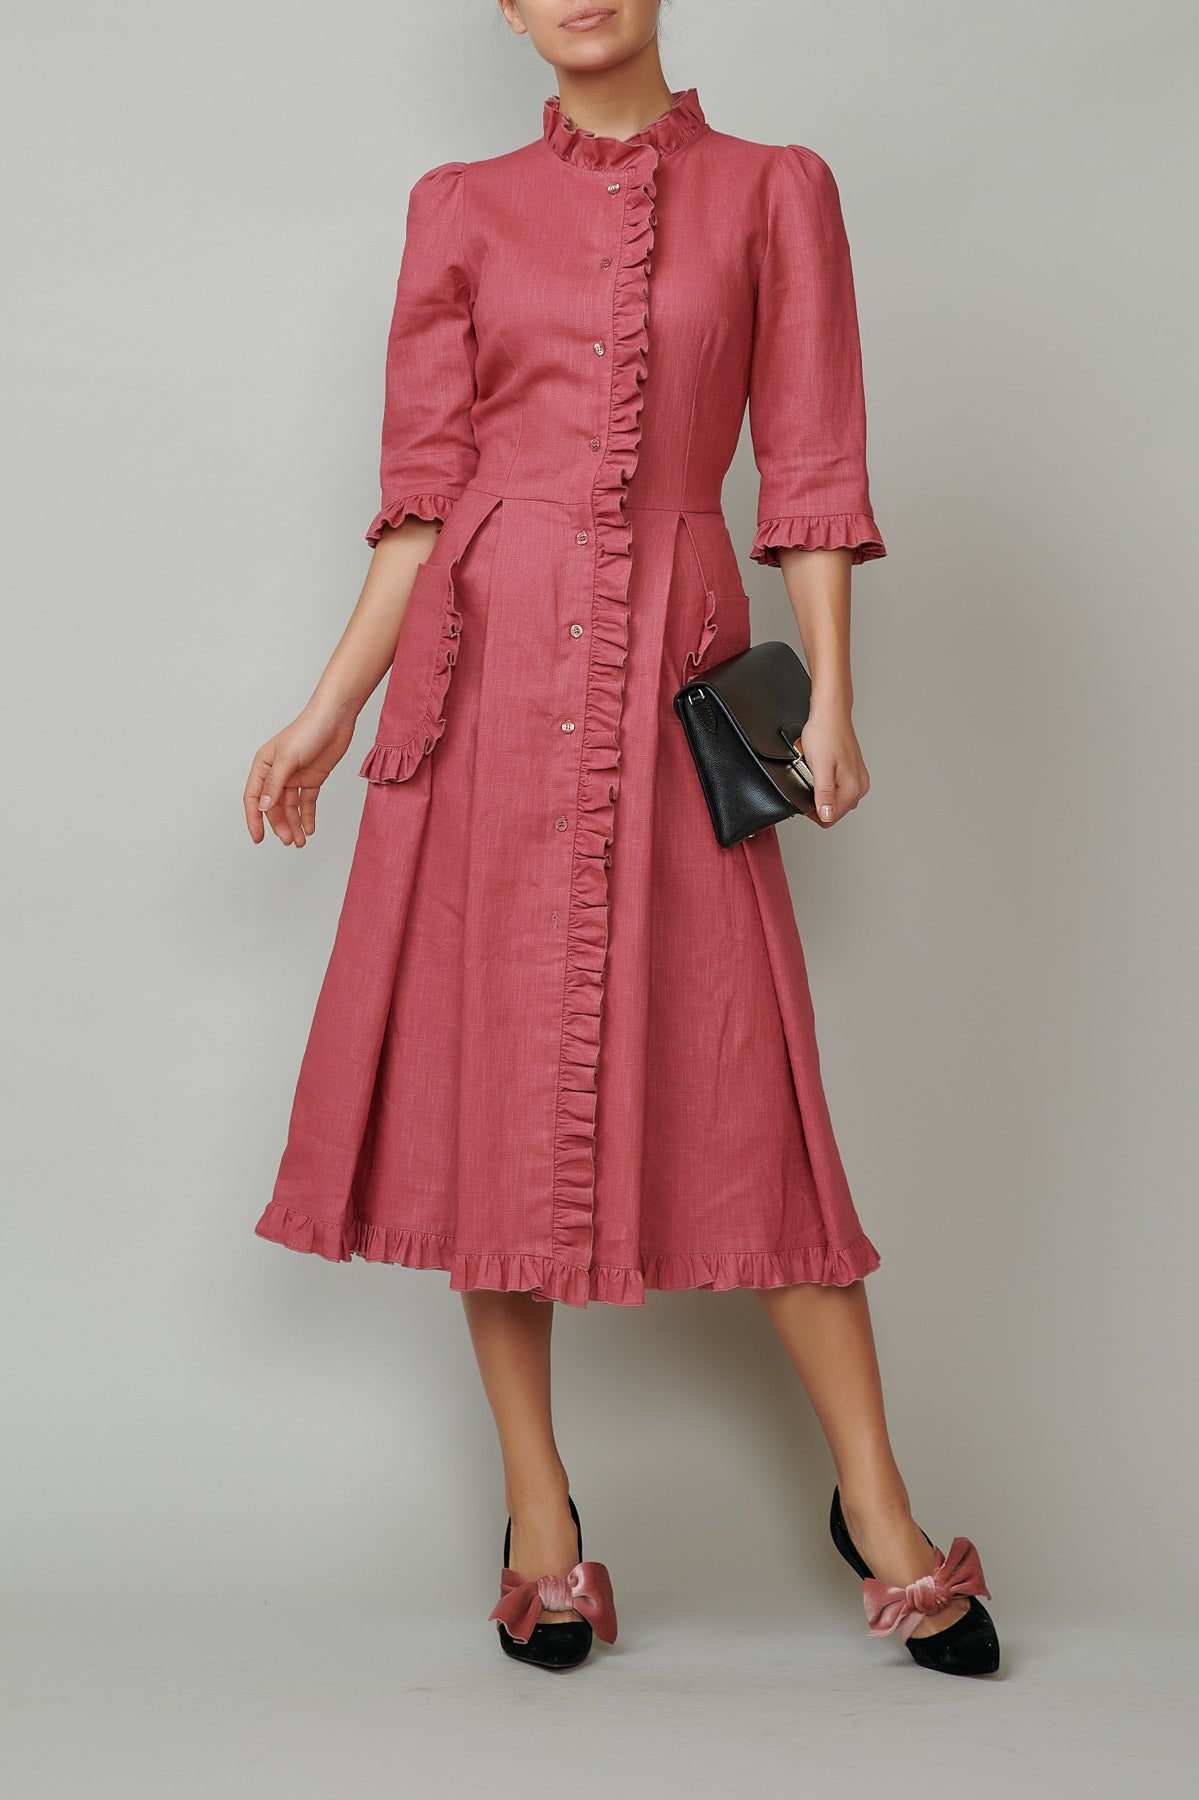 Shirt dress with applied pockets and ruffles, made of pink linen